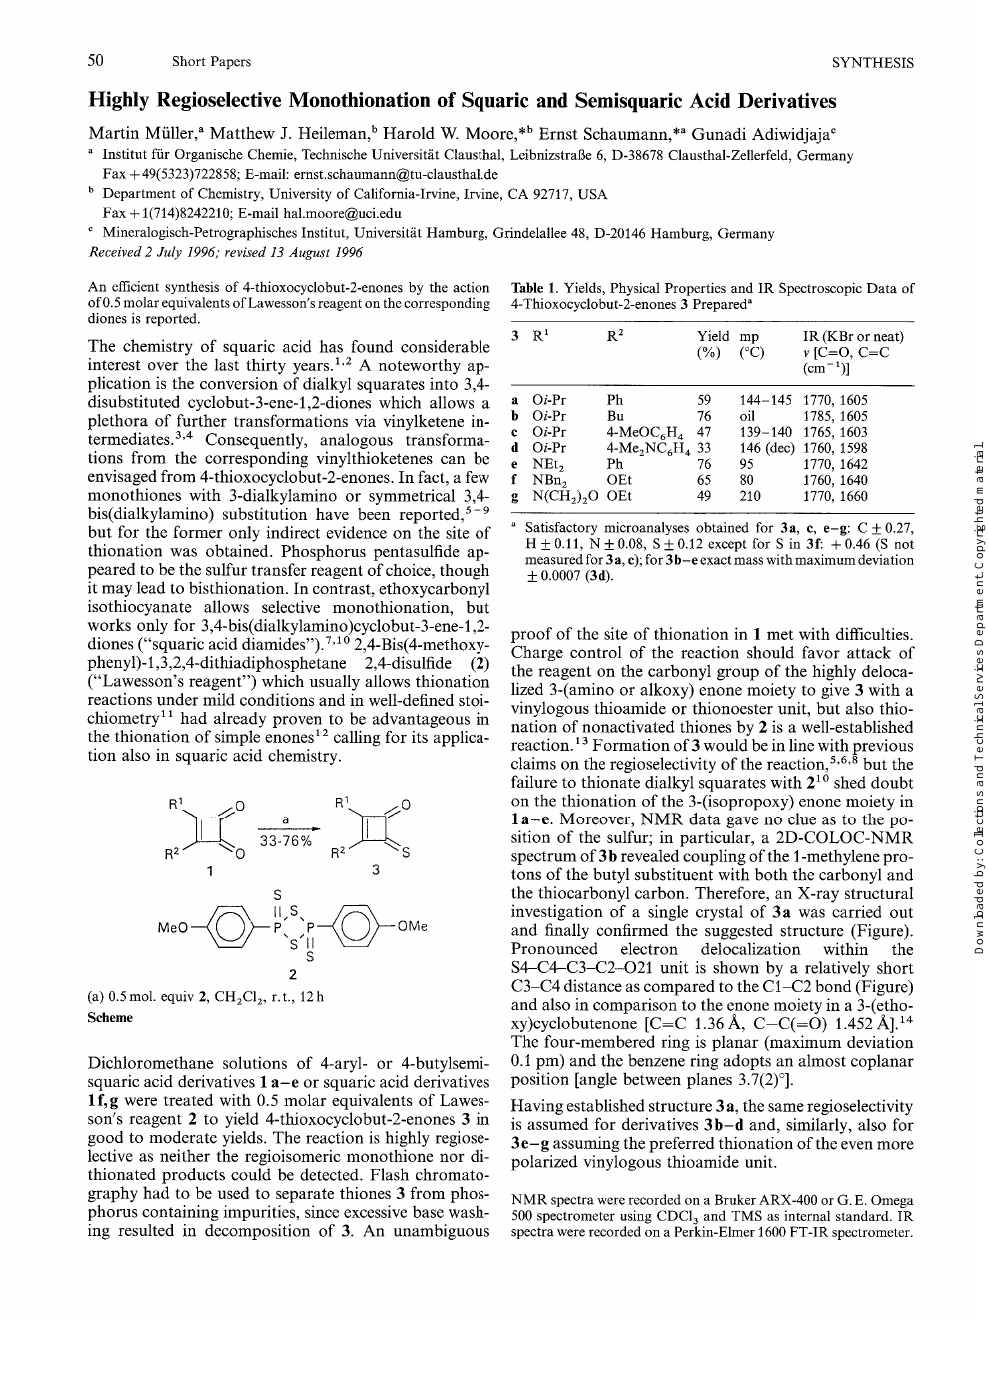 Highly Regioselective Monothionation Of Squaric And Semisquaric Acid Derivatives Topic Of Research Paper In Chemical Sciences Download Scholarly Article Pdf And Read For Free On Cyberleninka Open Science Hub